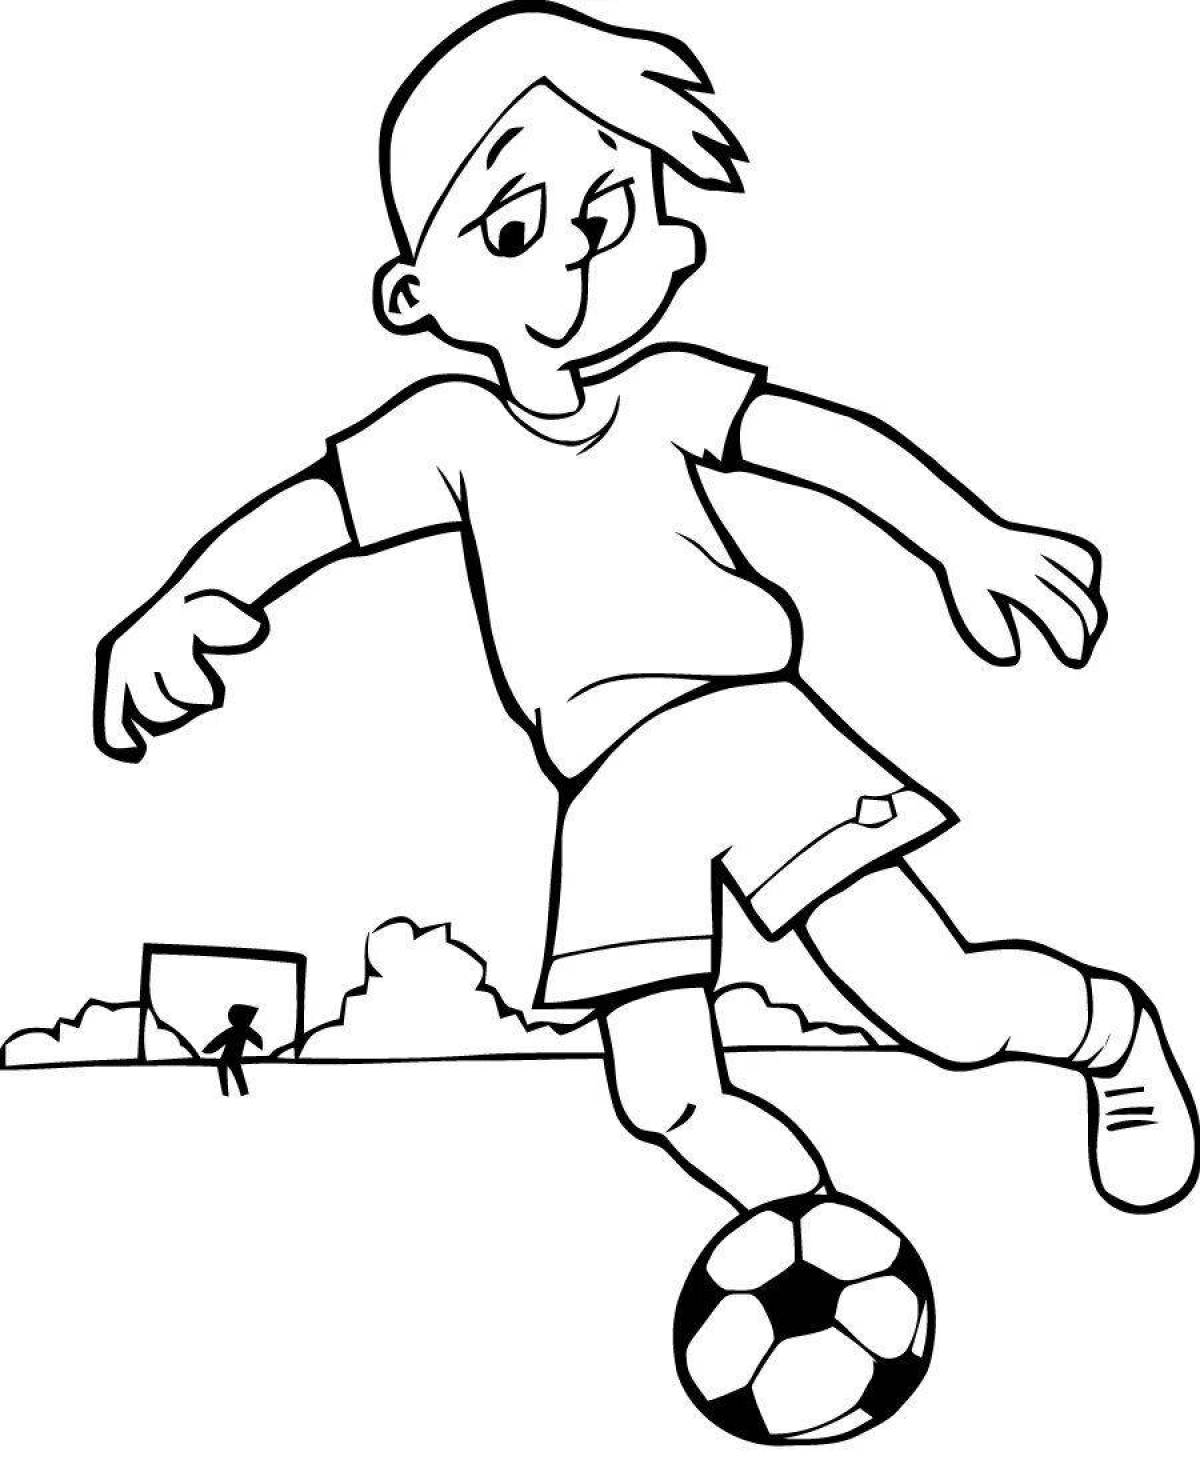 Coloring page bright boy playing football